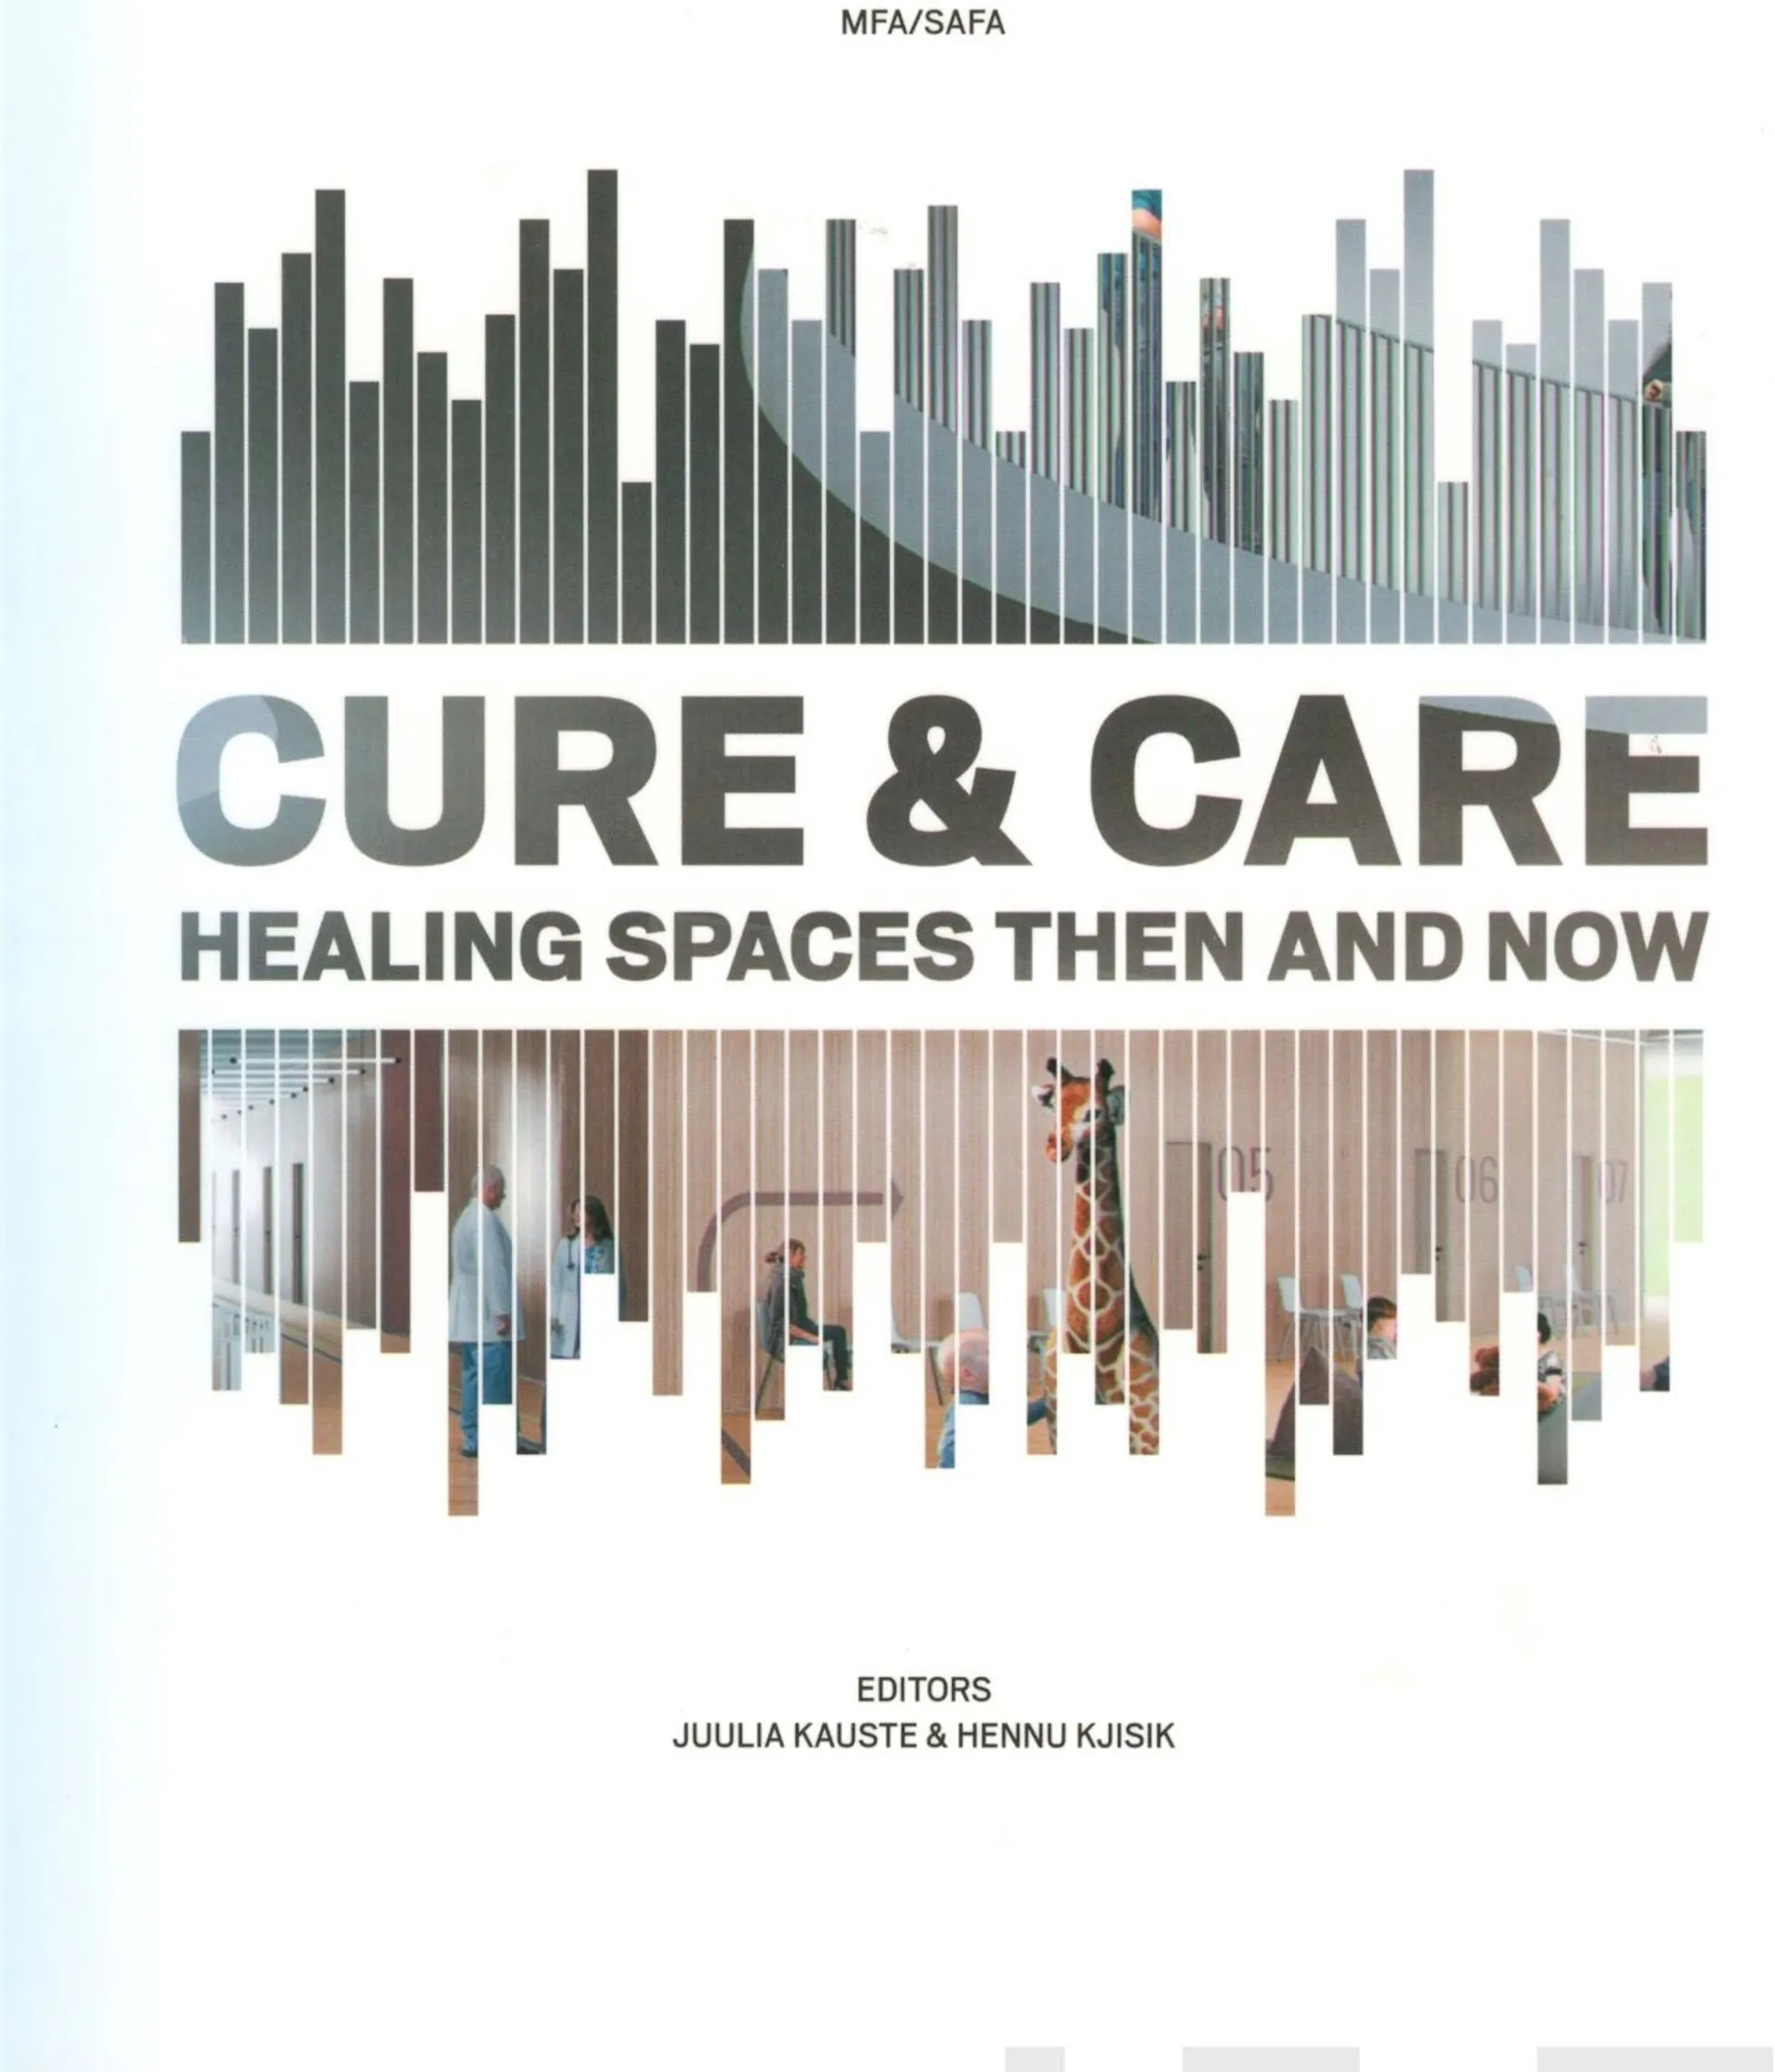 Cure and care - Healing spaces then and now